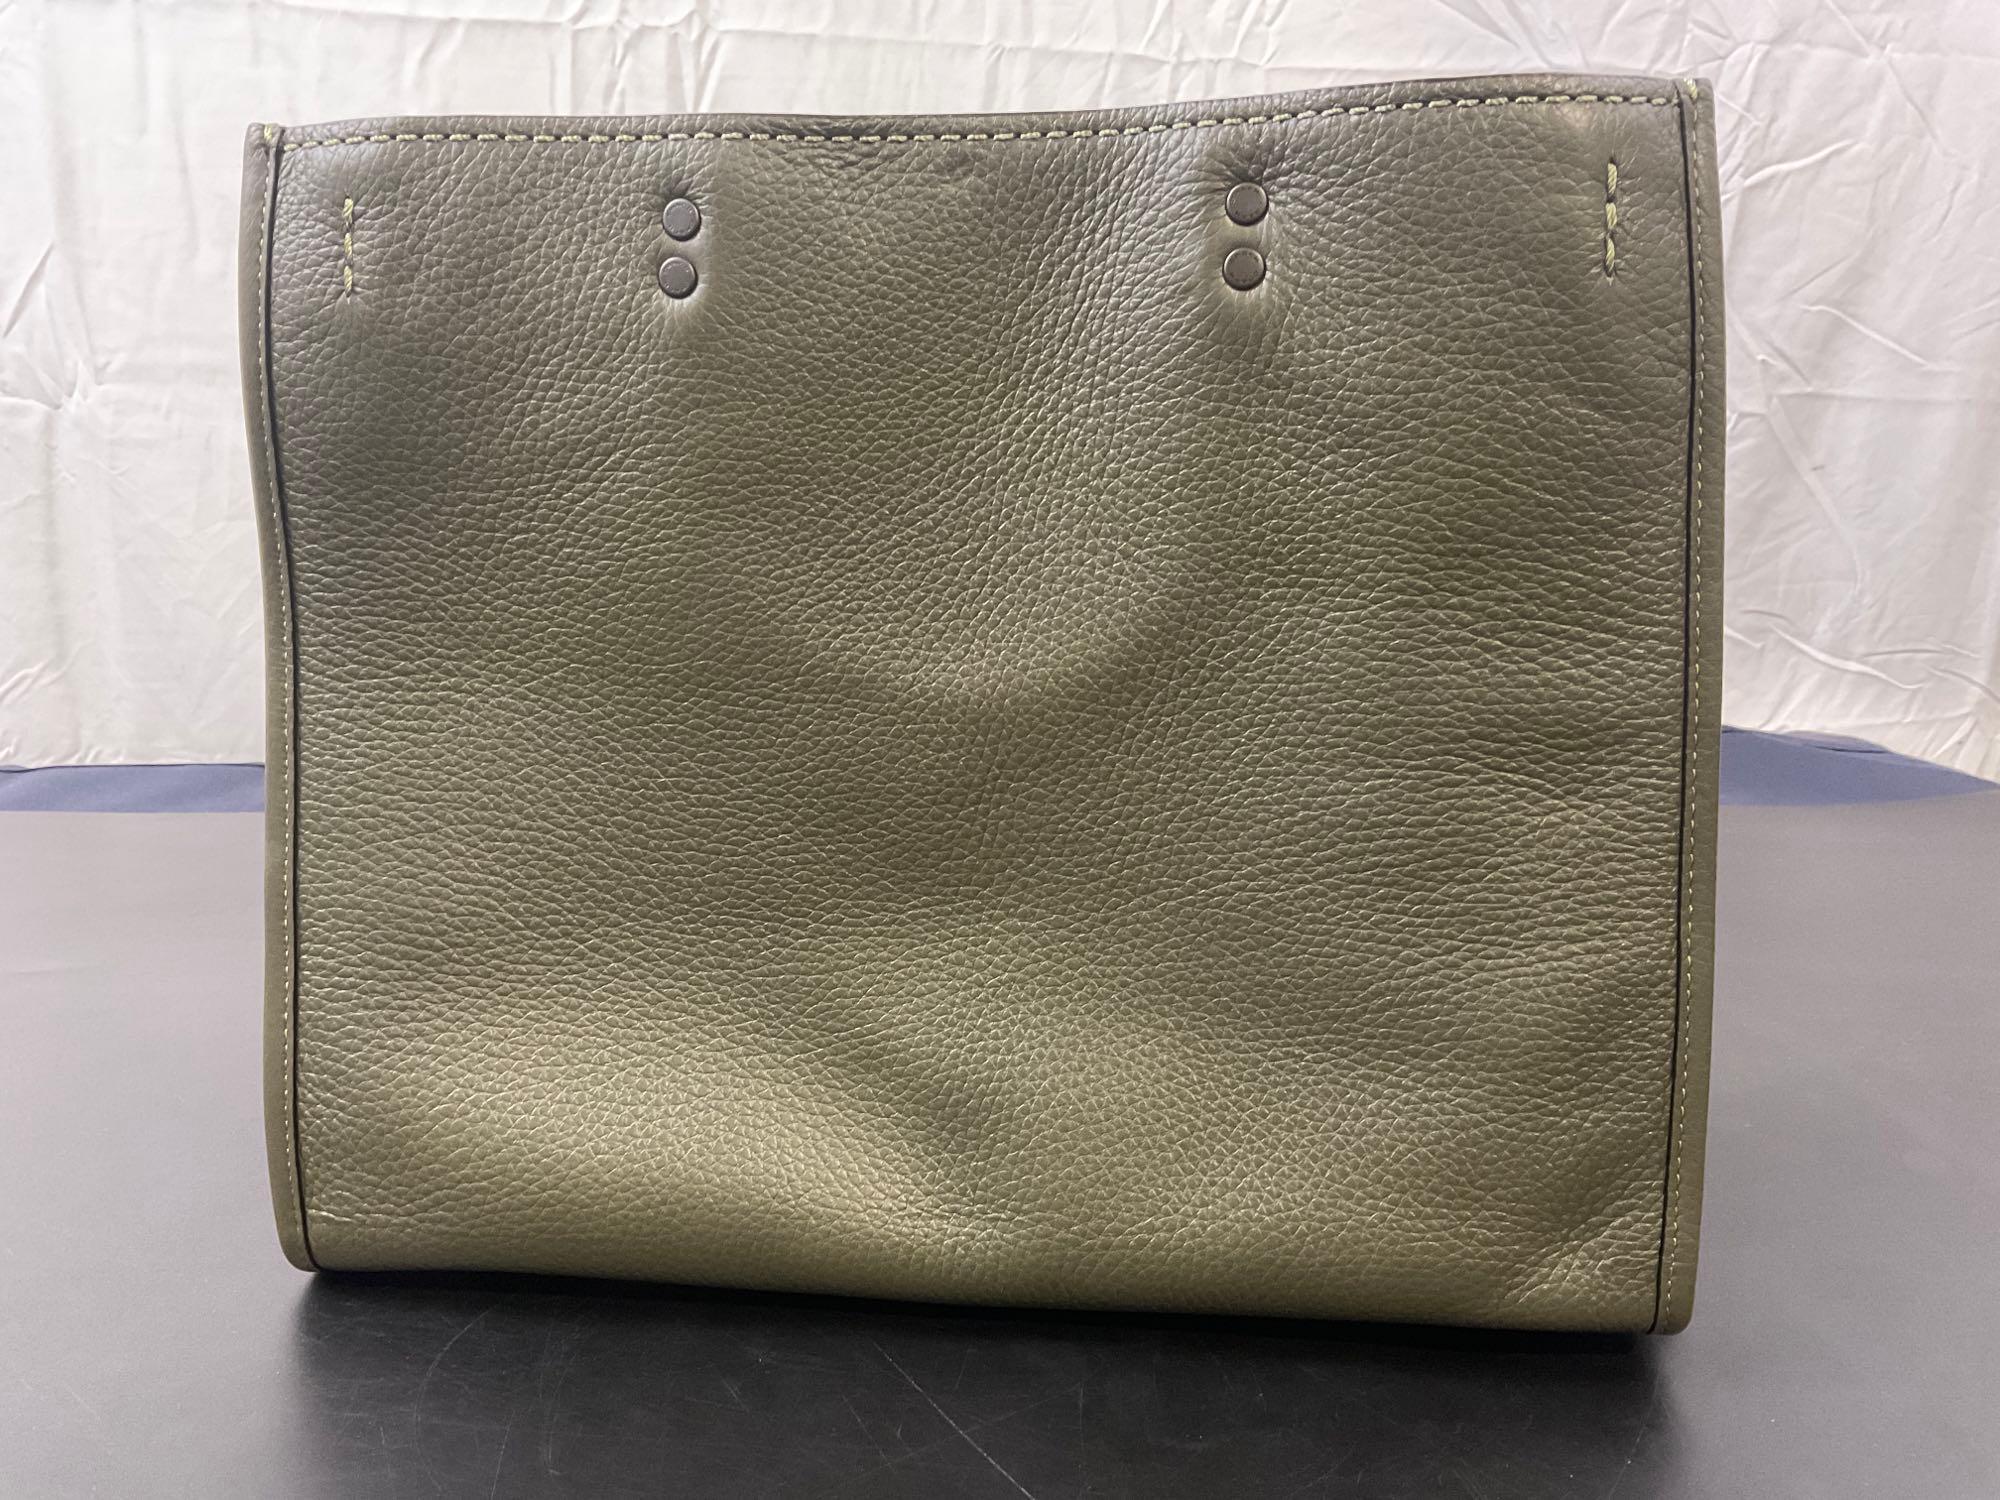 Brand New Coach Olive Leather Purse PBB Rogue Bag